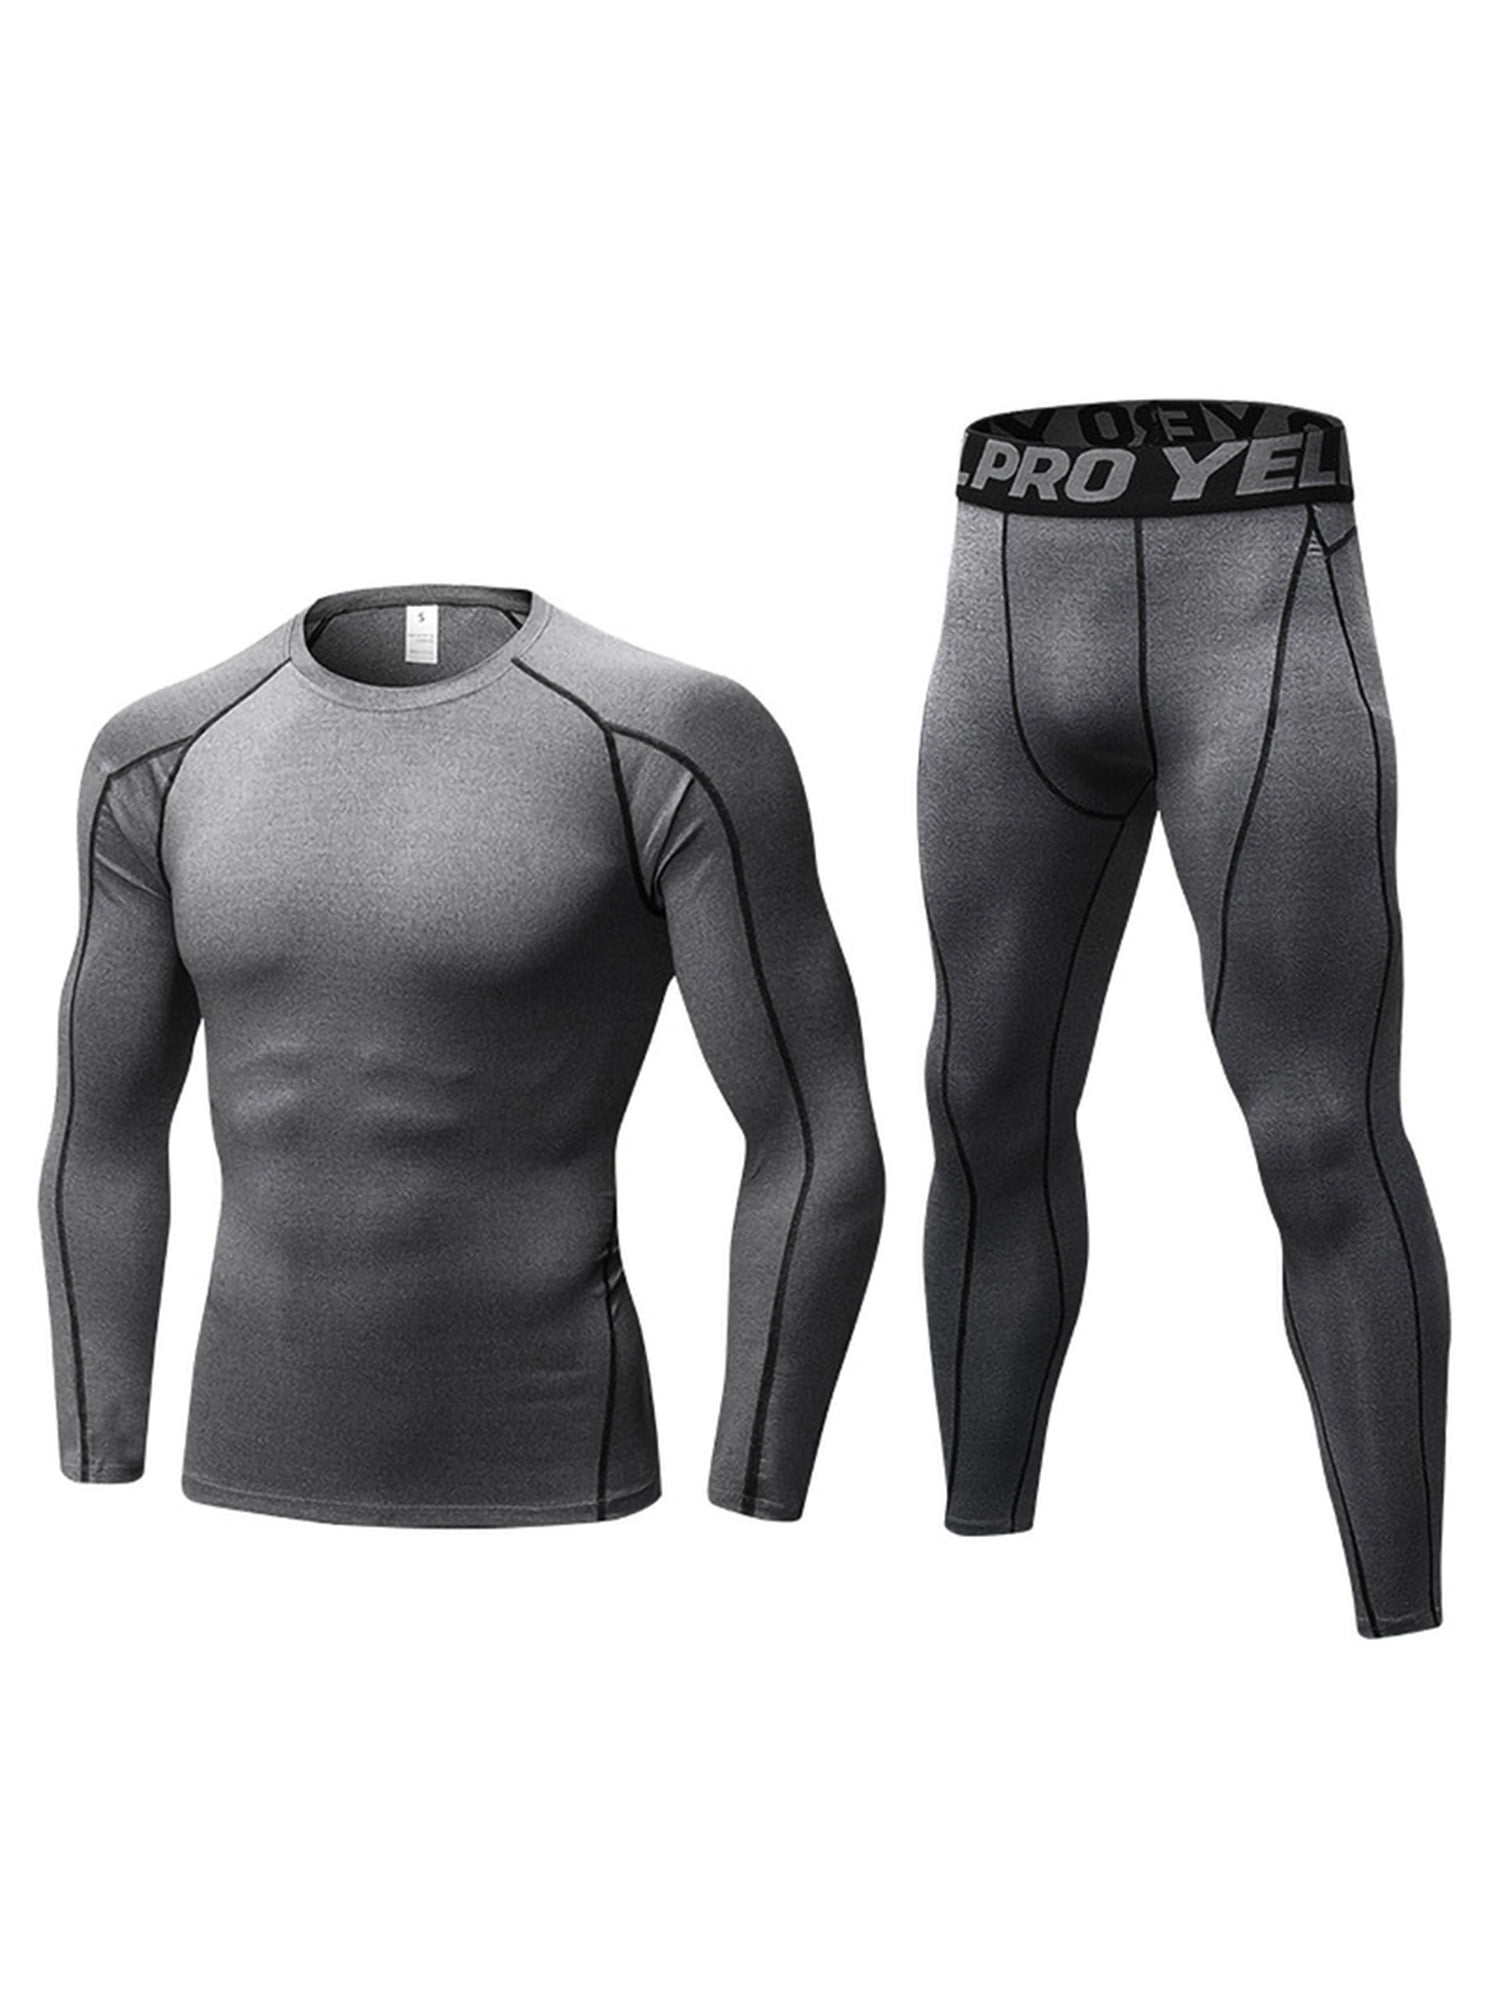 Viper Unisex Skins Sportswear Running Yoga Fitness Compression Base Layer Top 